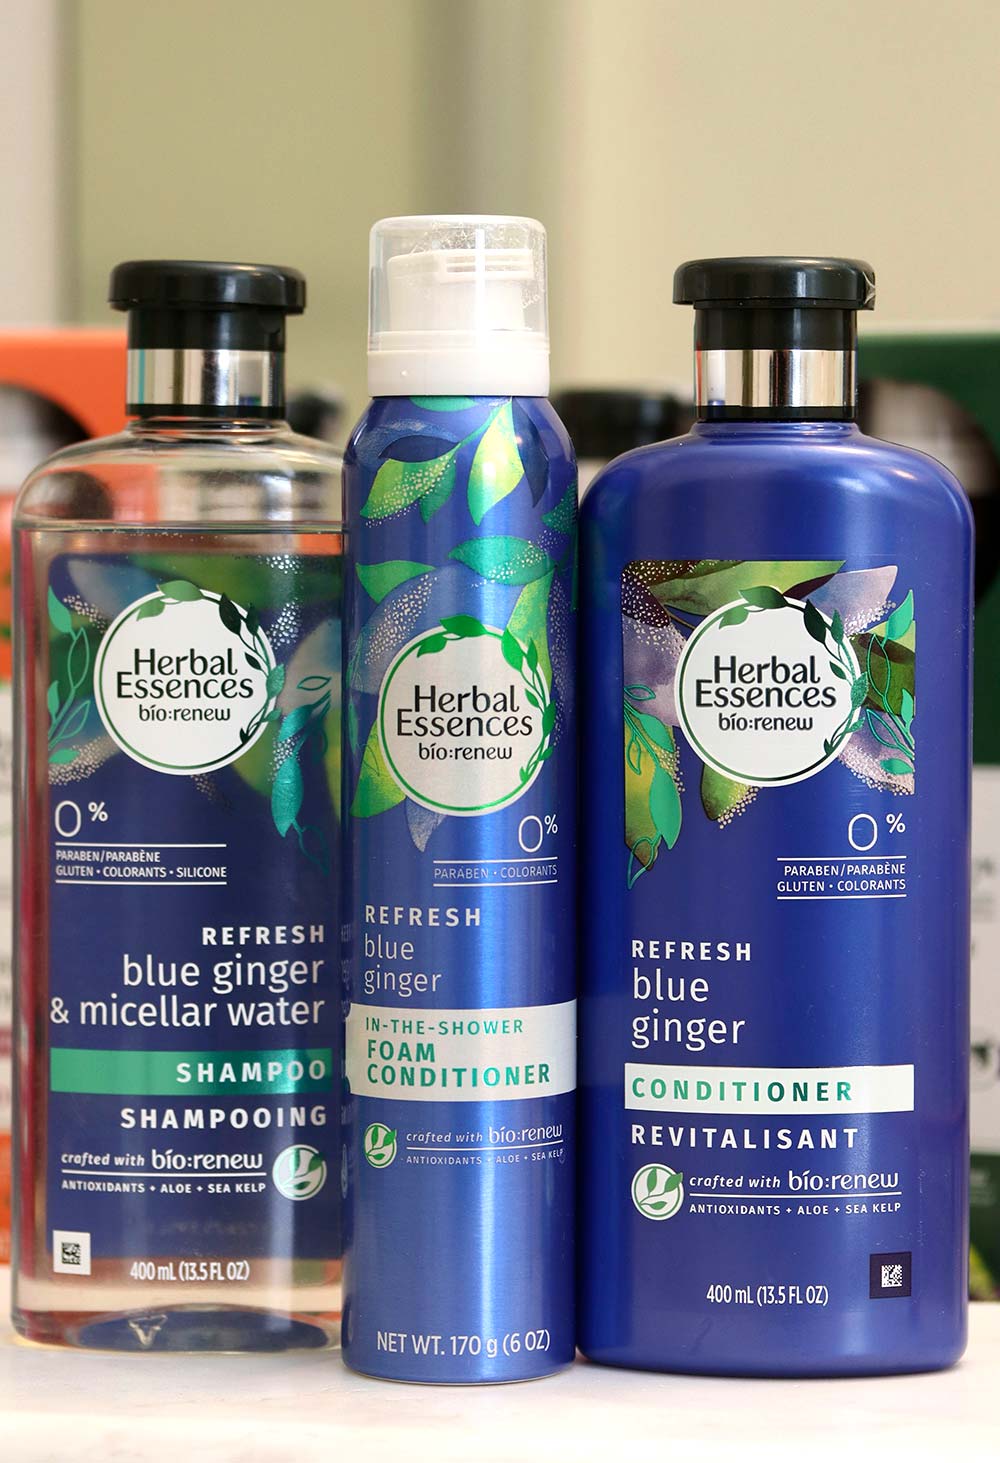 herbal essences szampon micellar water and blue ginger